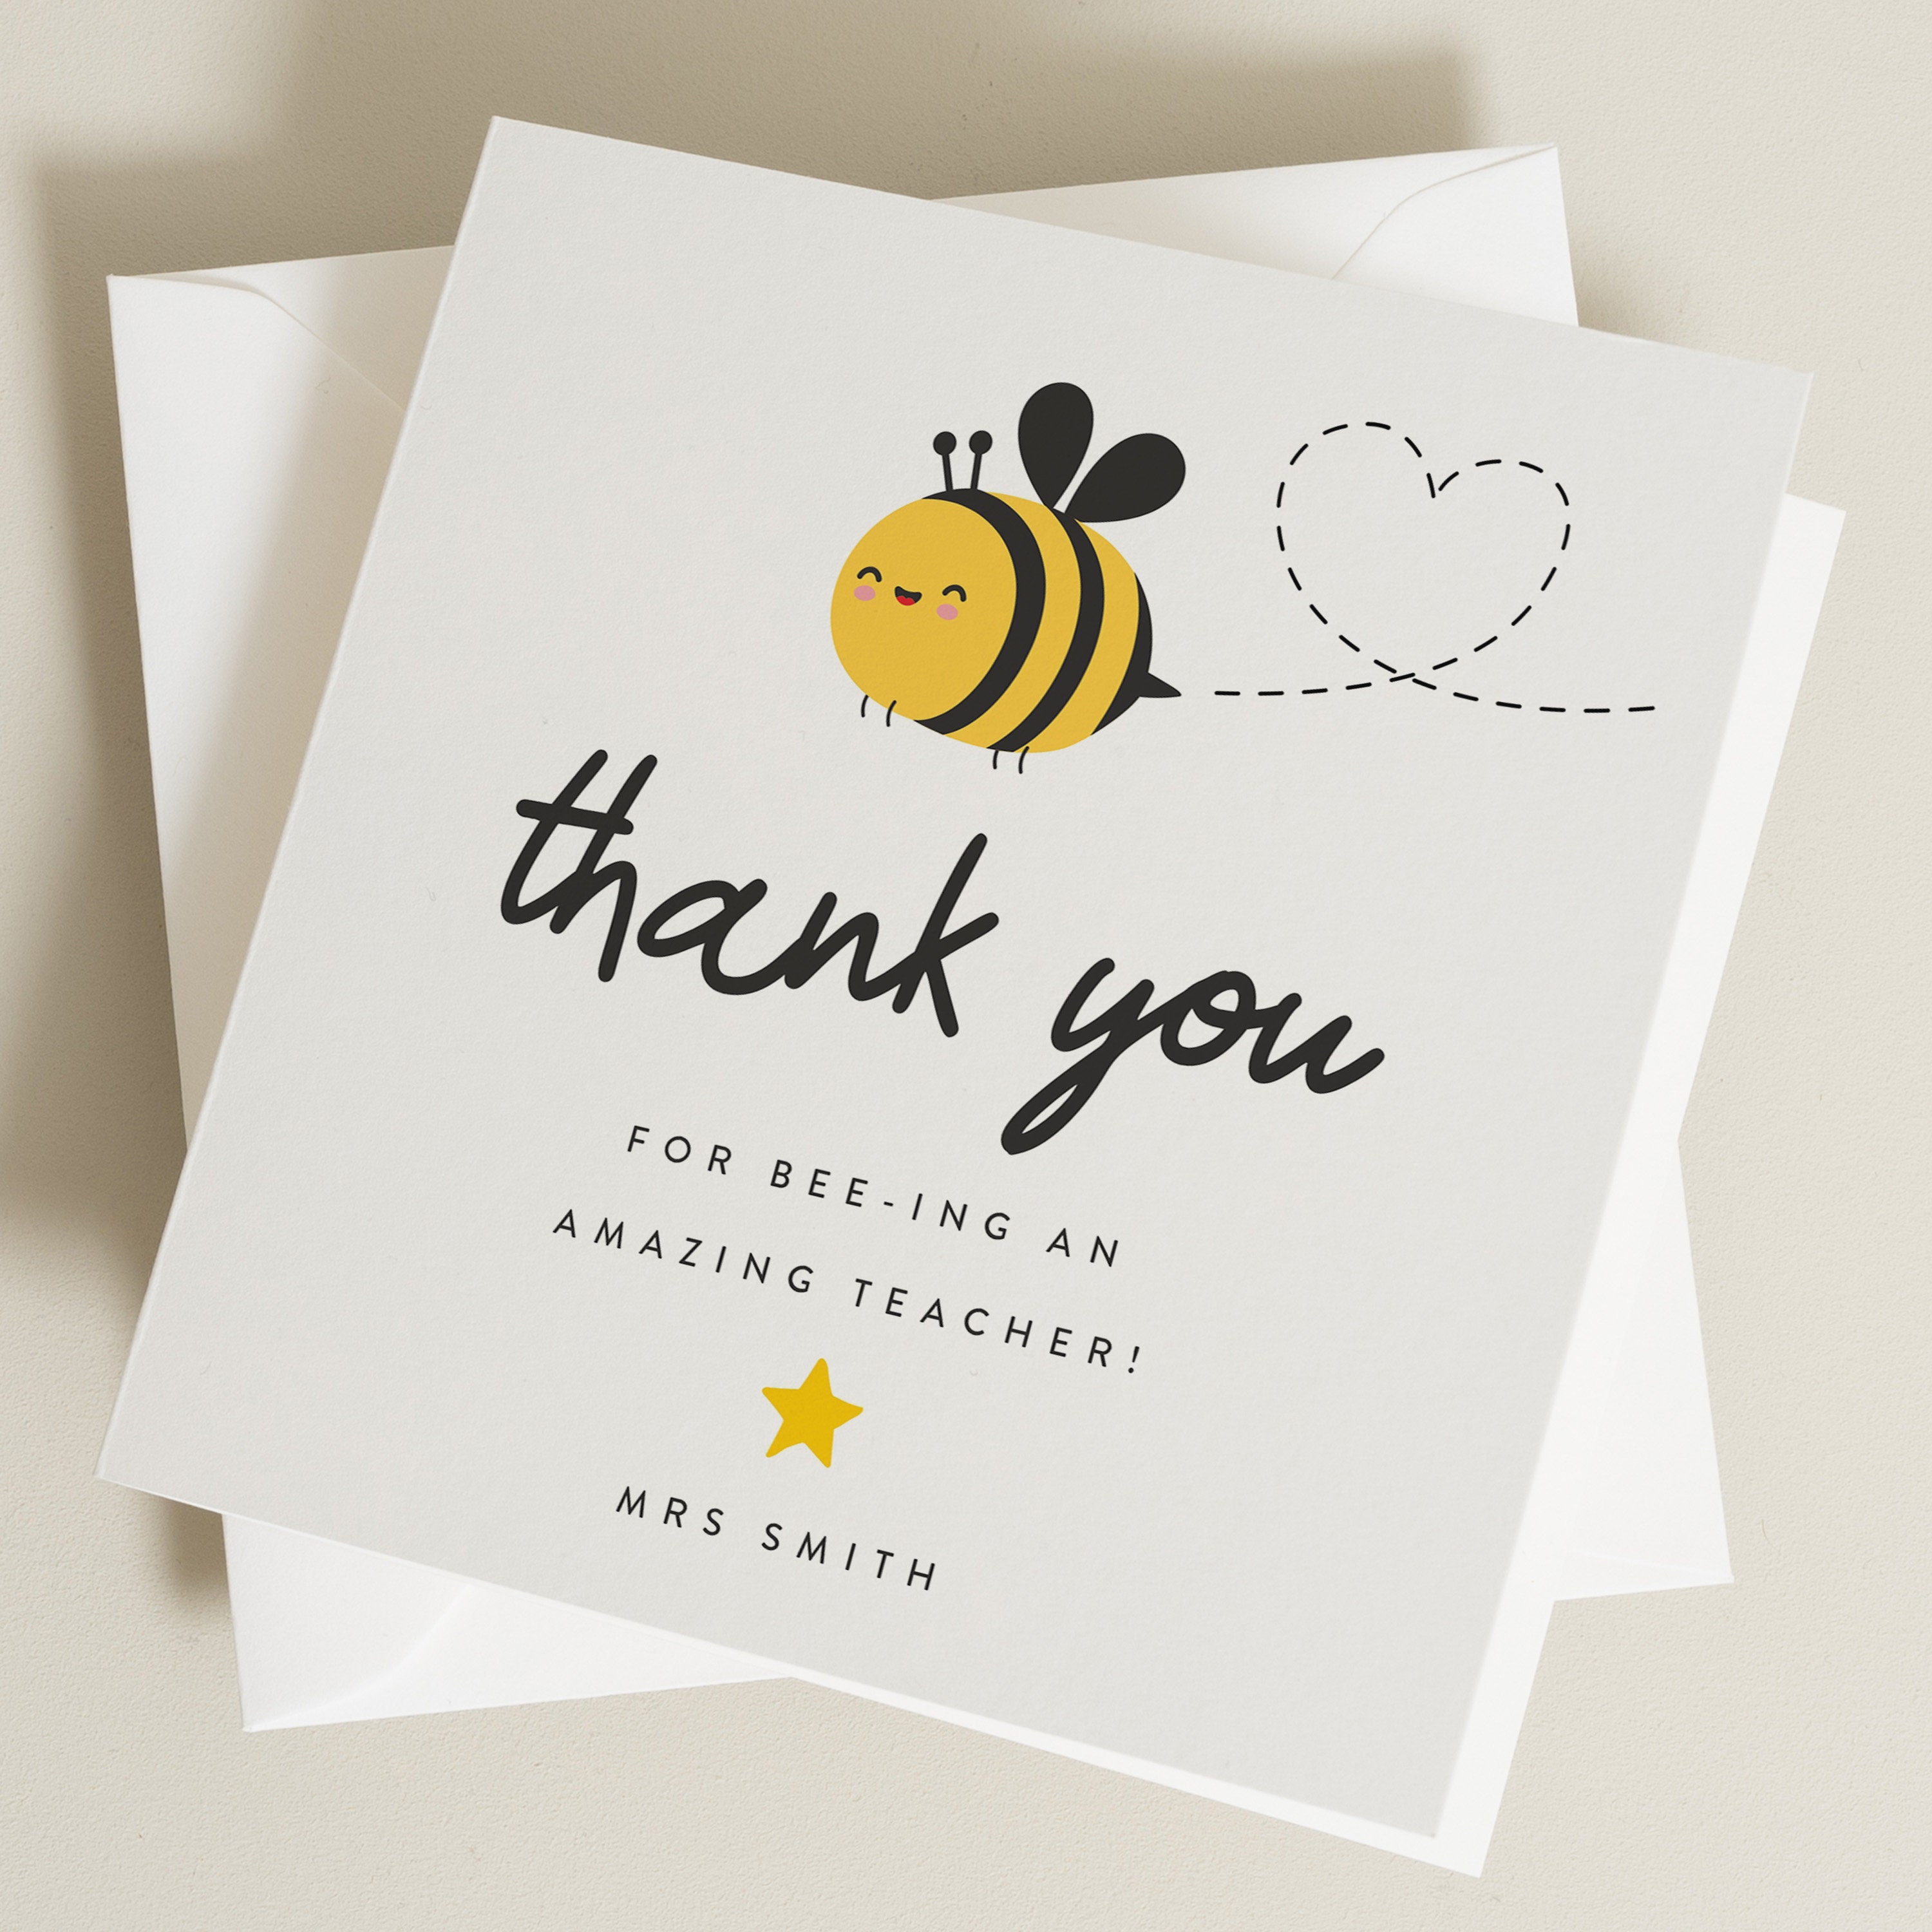 Appreciation in Style With Amazing Custom Thank You Cards